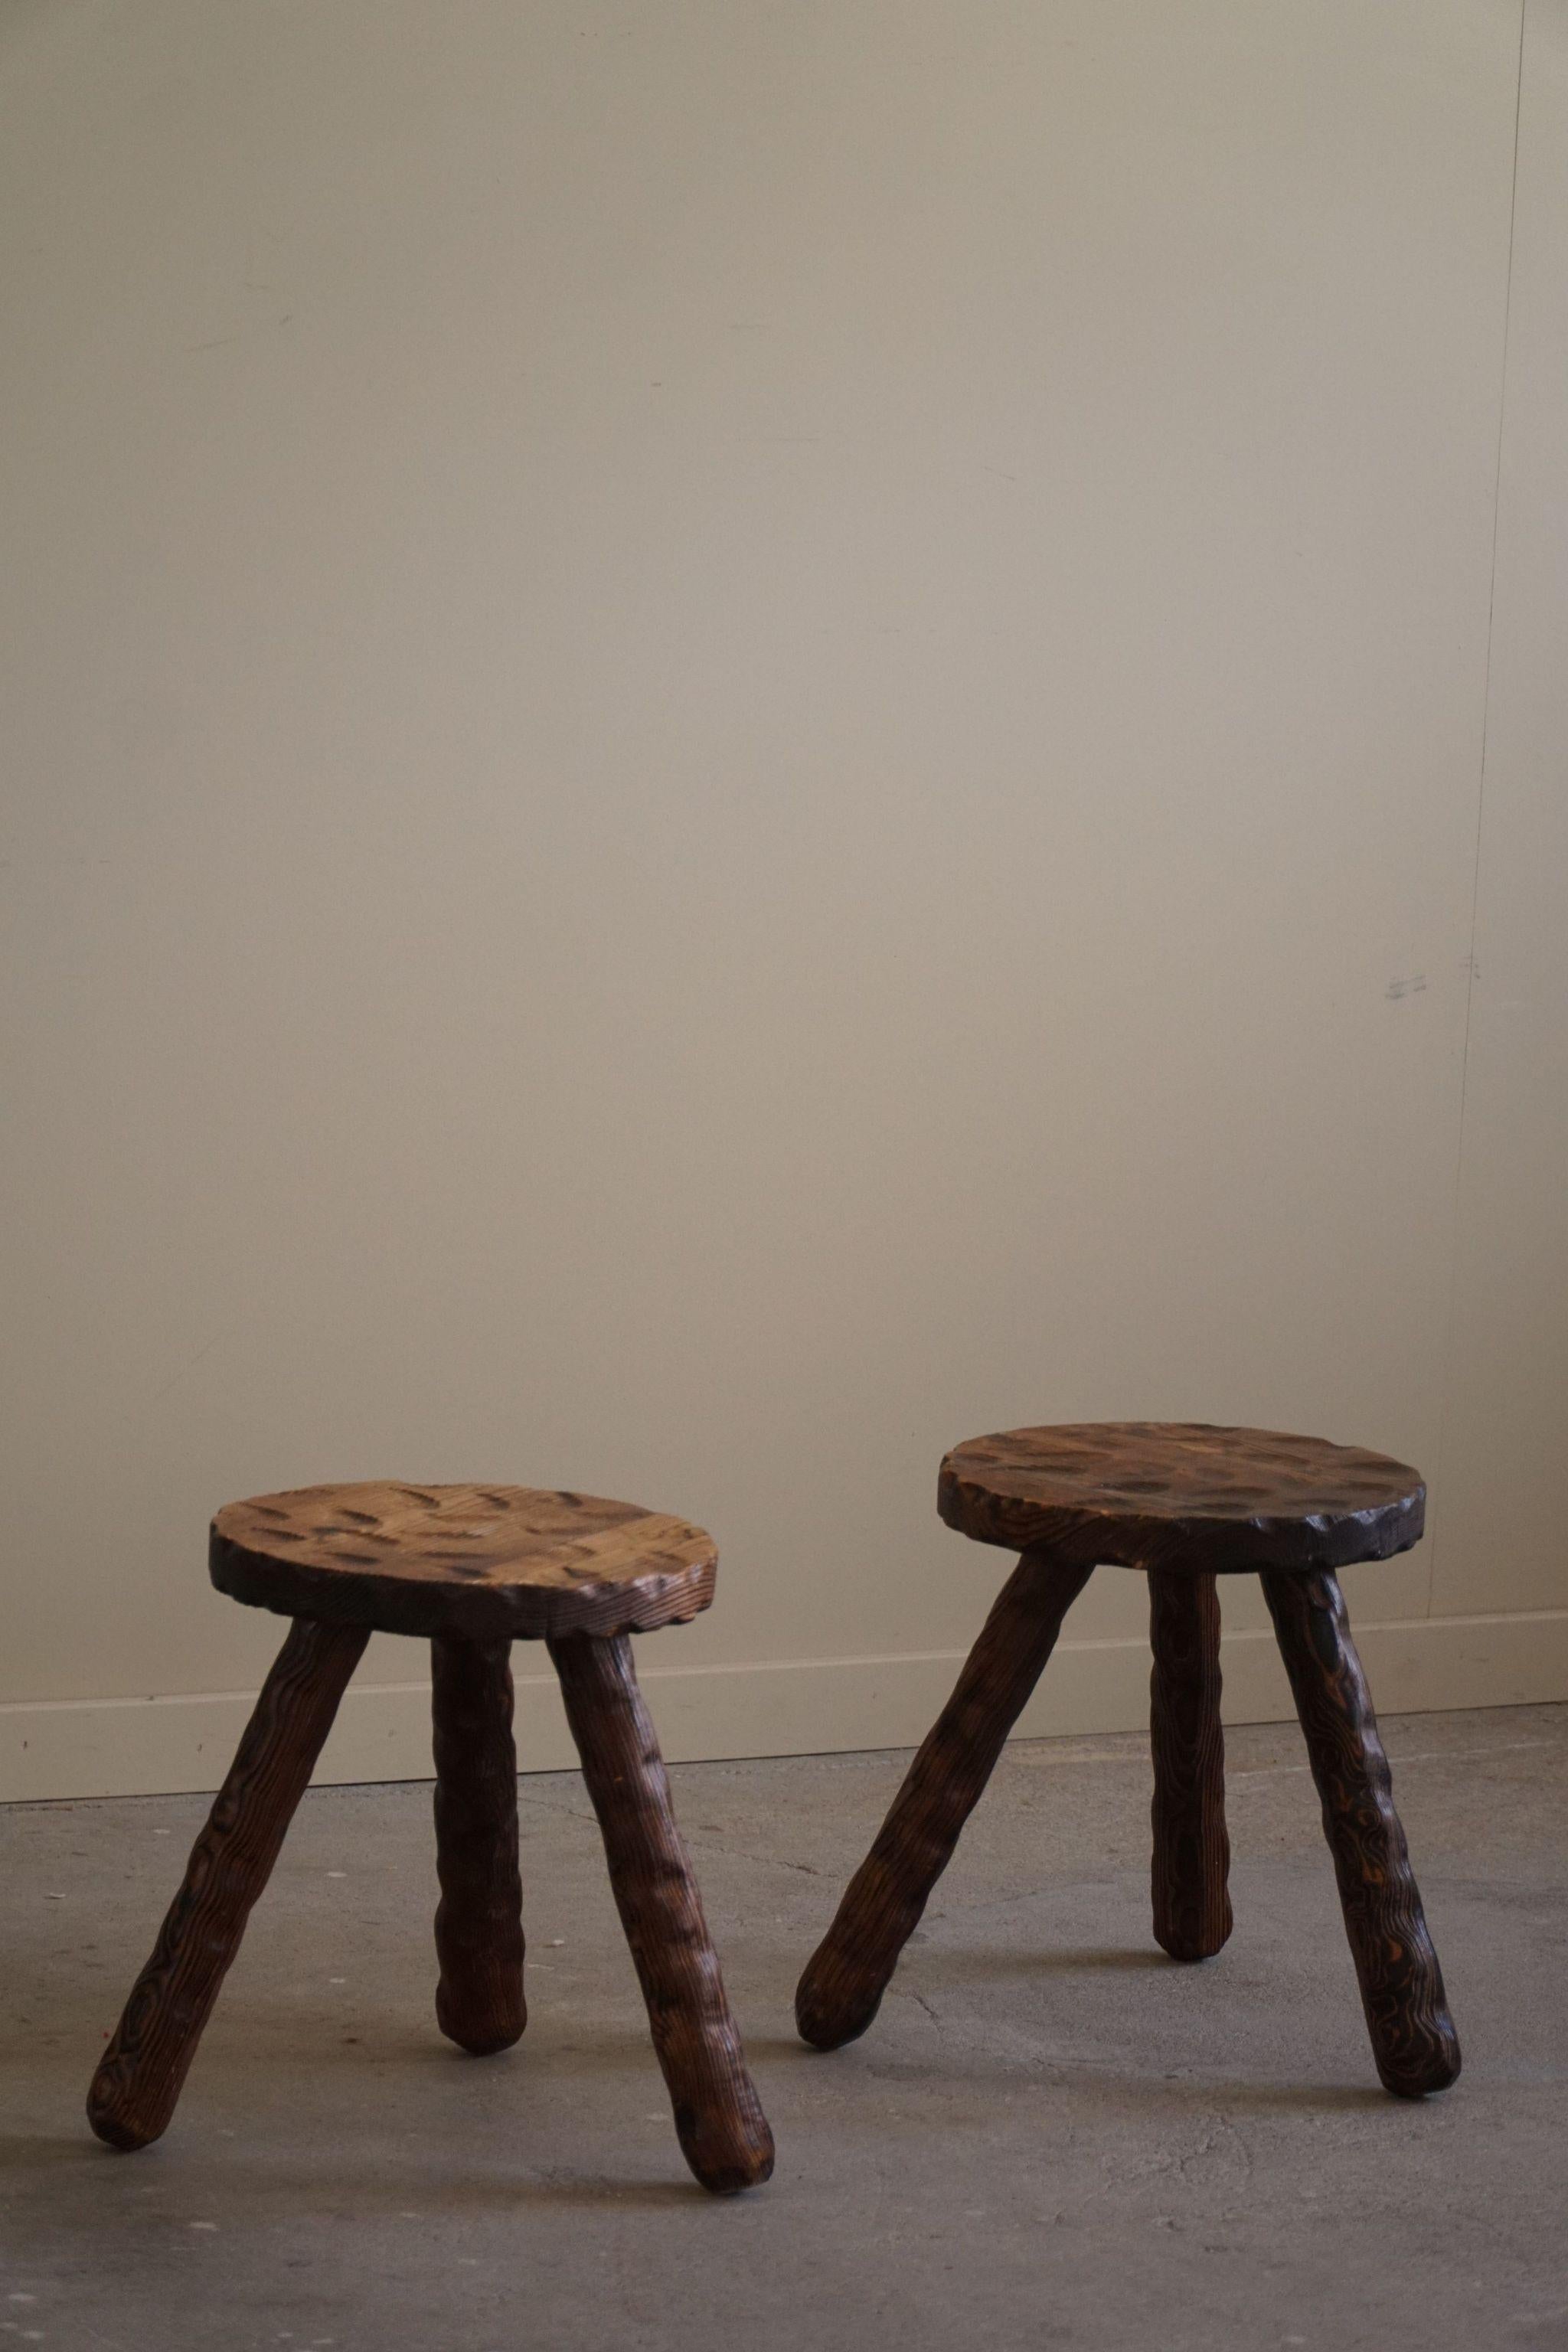 A Pair of Carved Wabi Sabi Stools in Pine, Swedish Mid Century Modern, 1960s For Sale 5